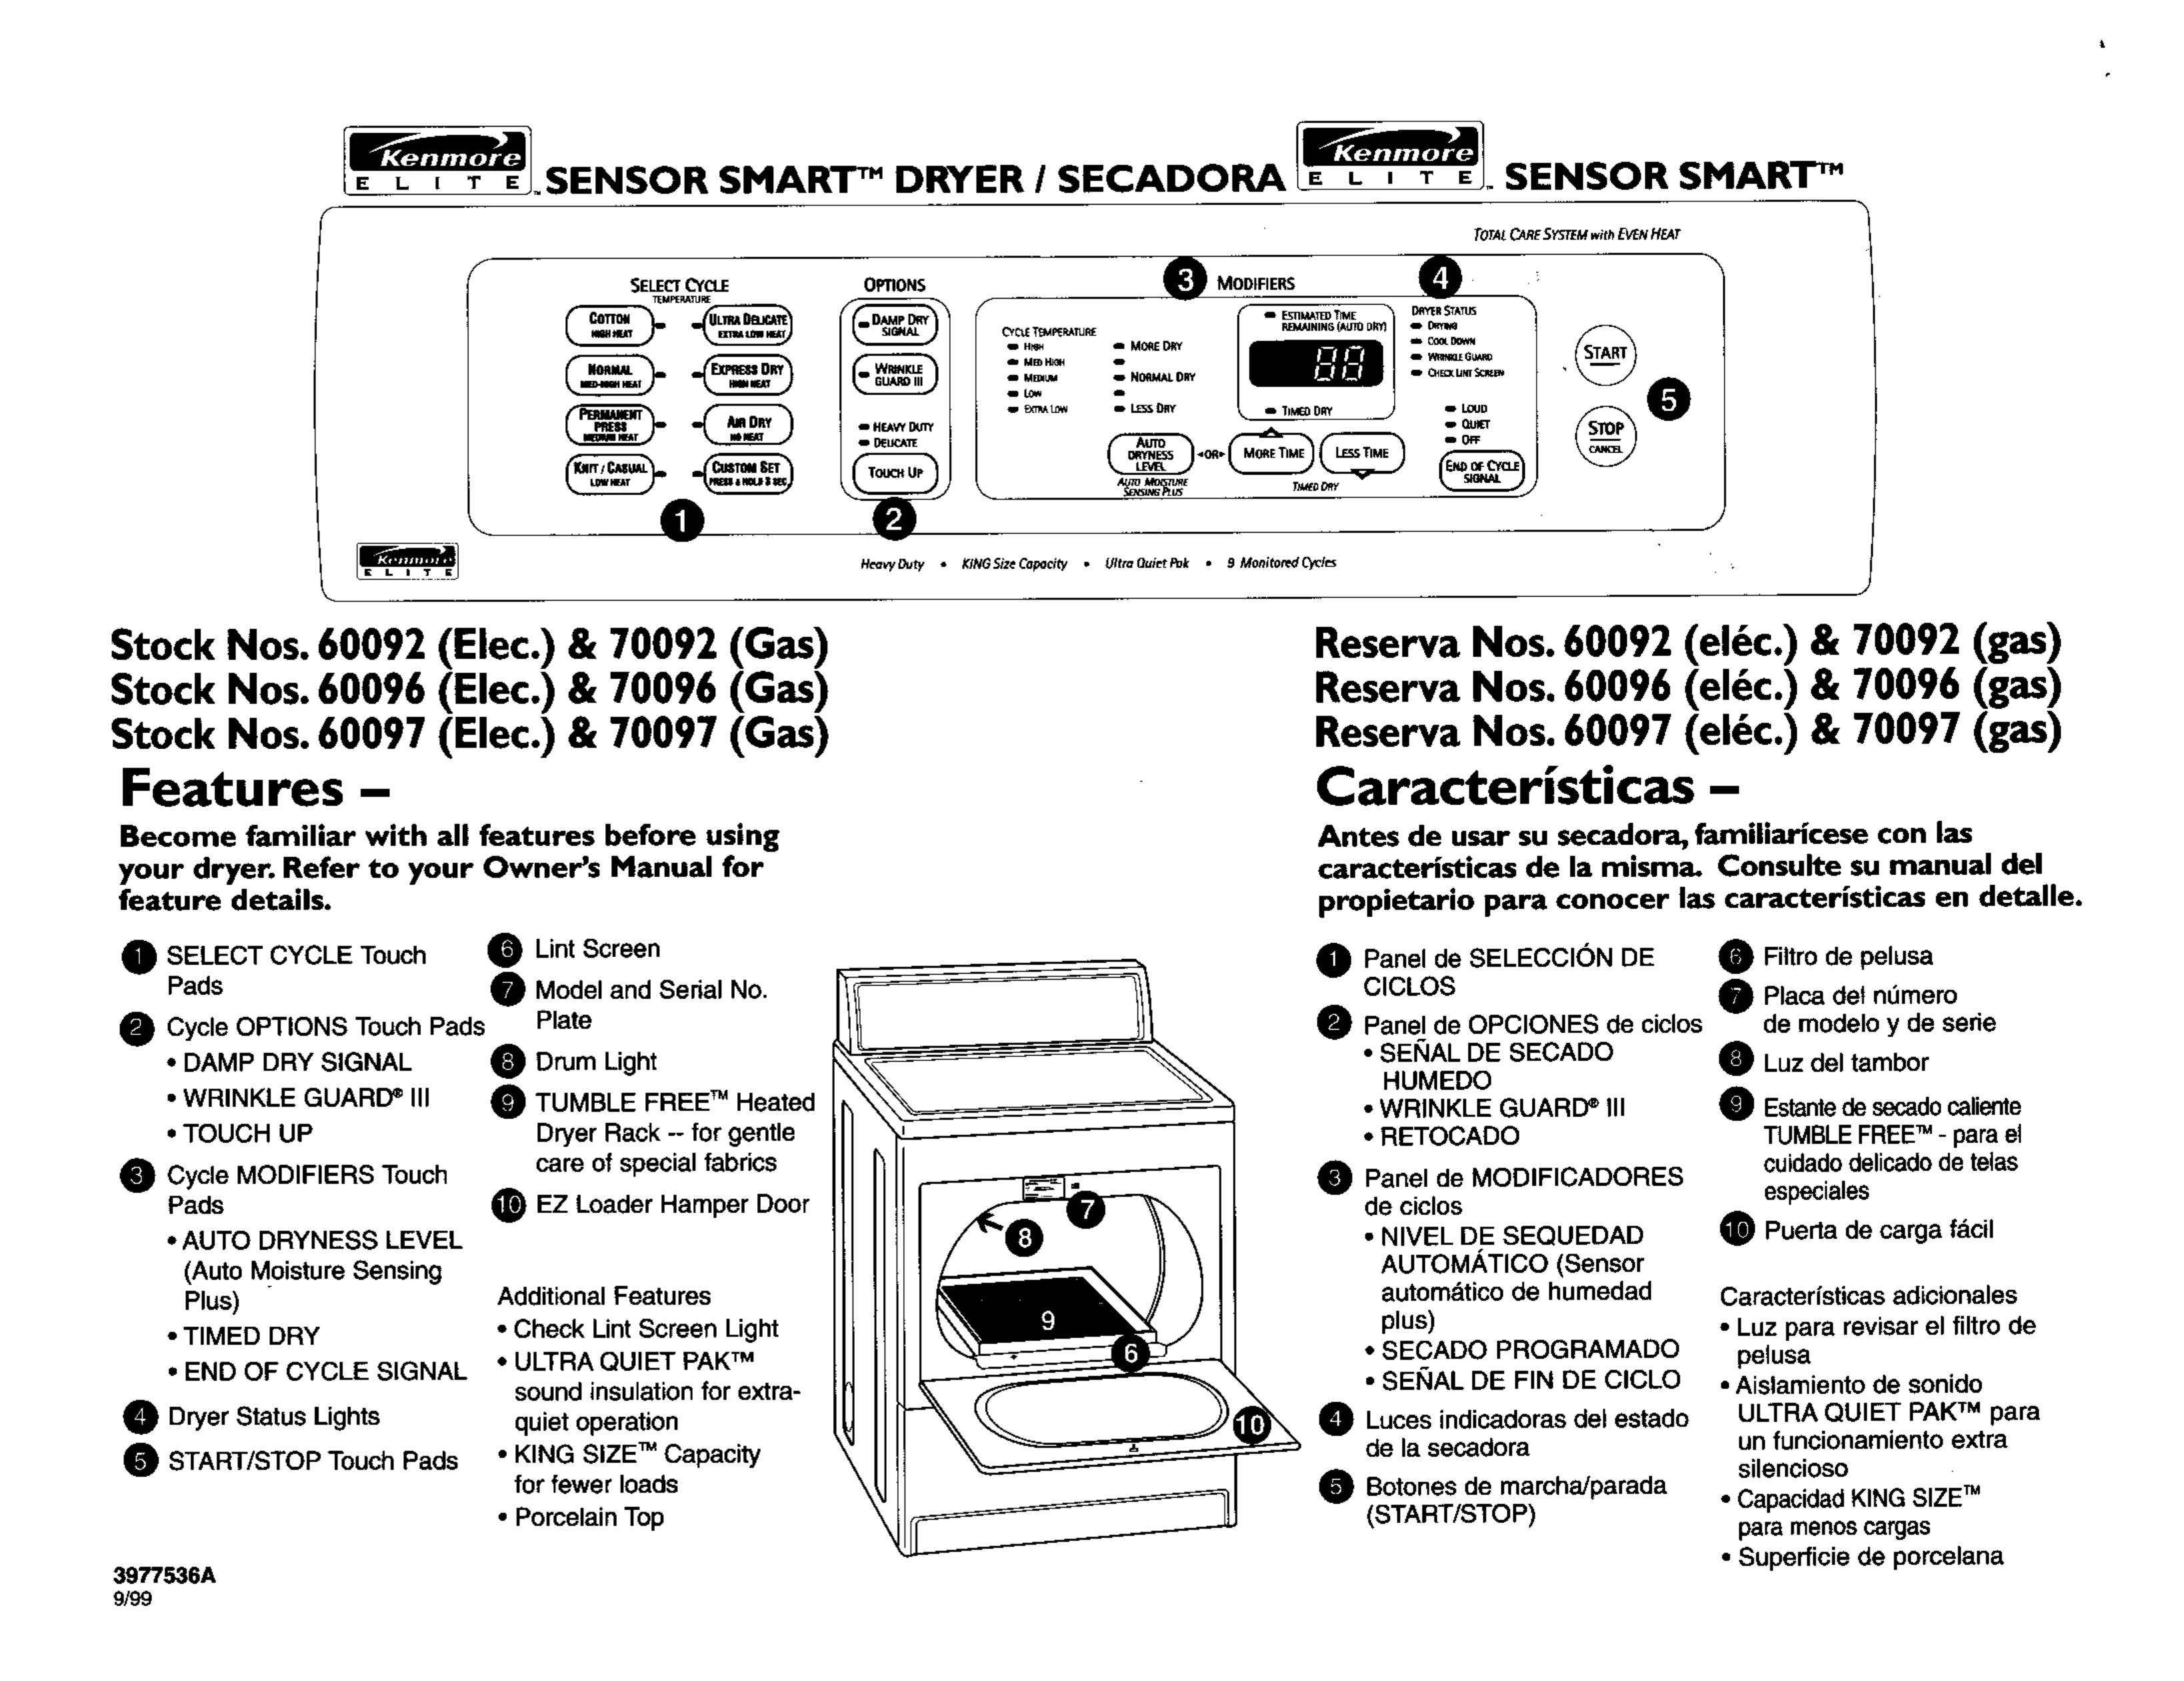 Kenmore 60096 Clothes Dryer User Manual